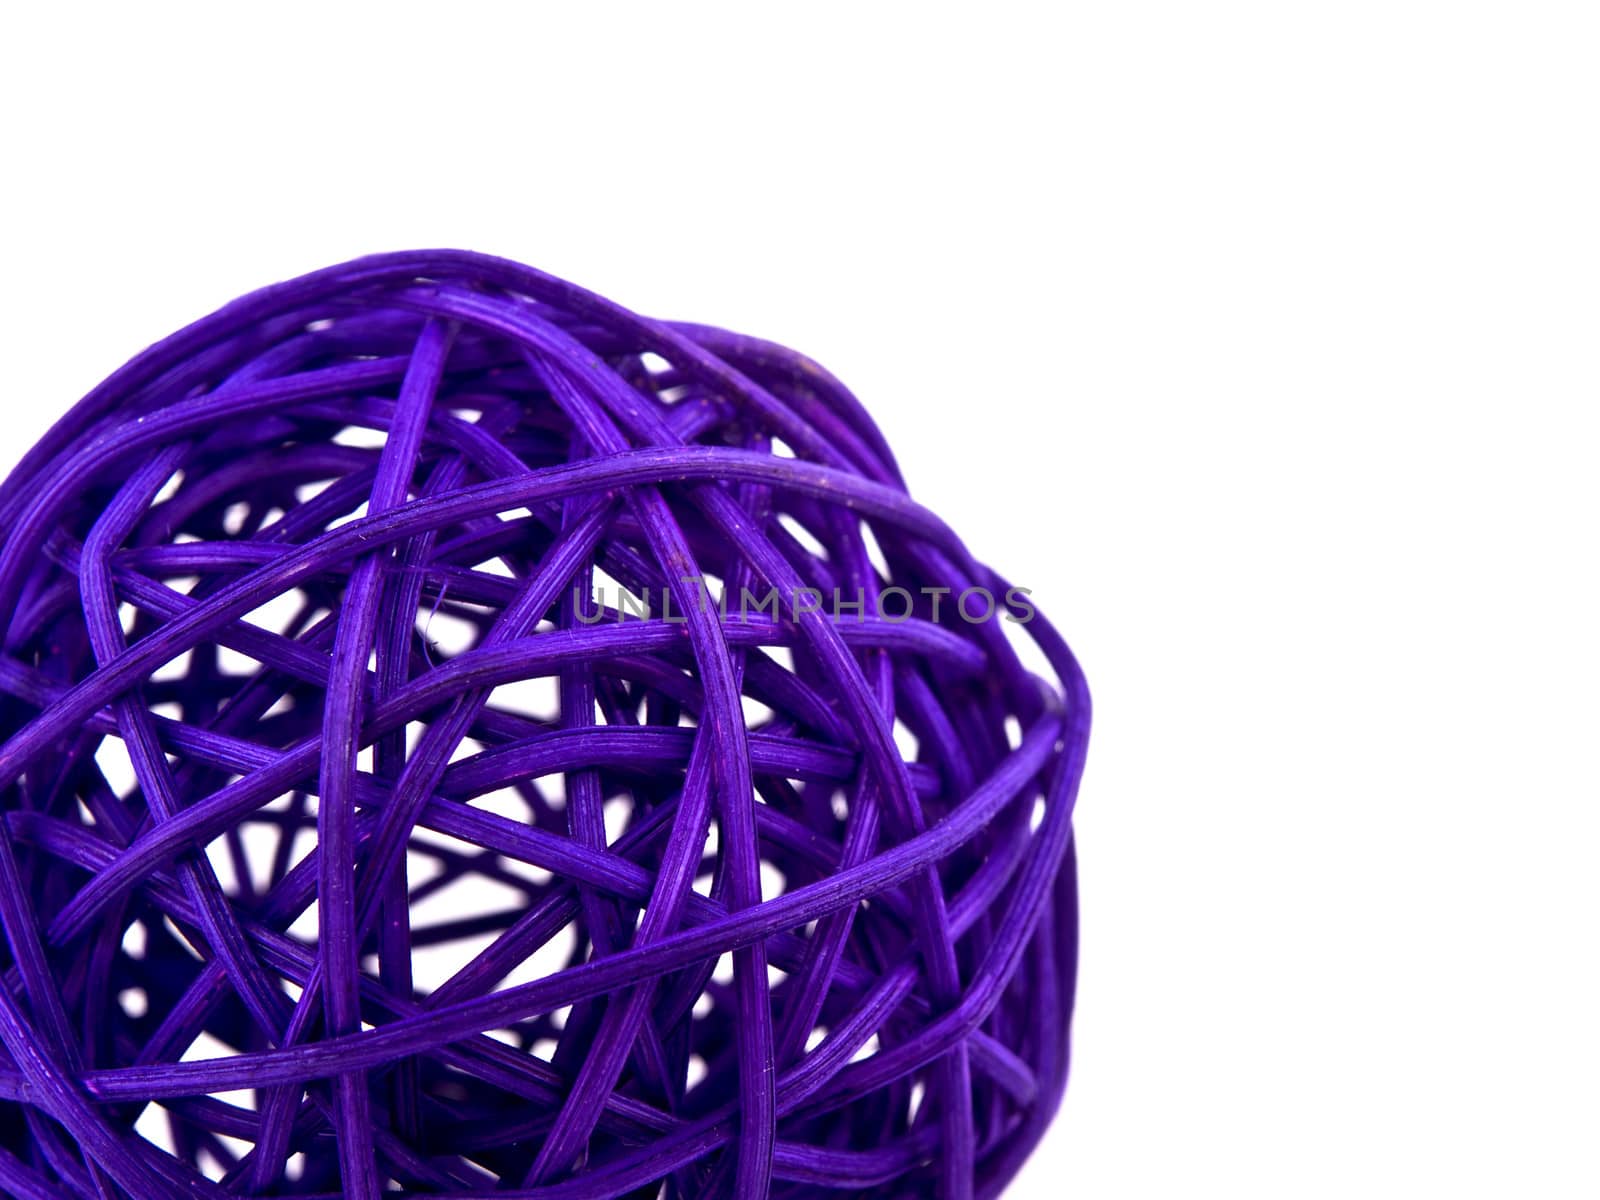 Closeup picture of purple rattan ball on white background with empty space for your text